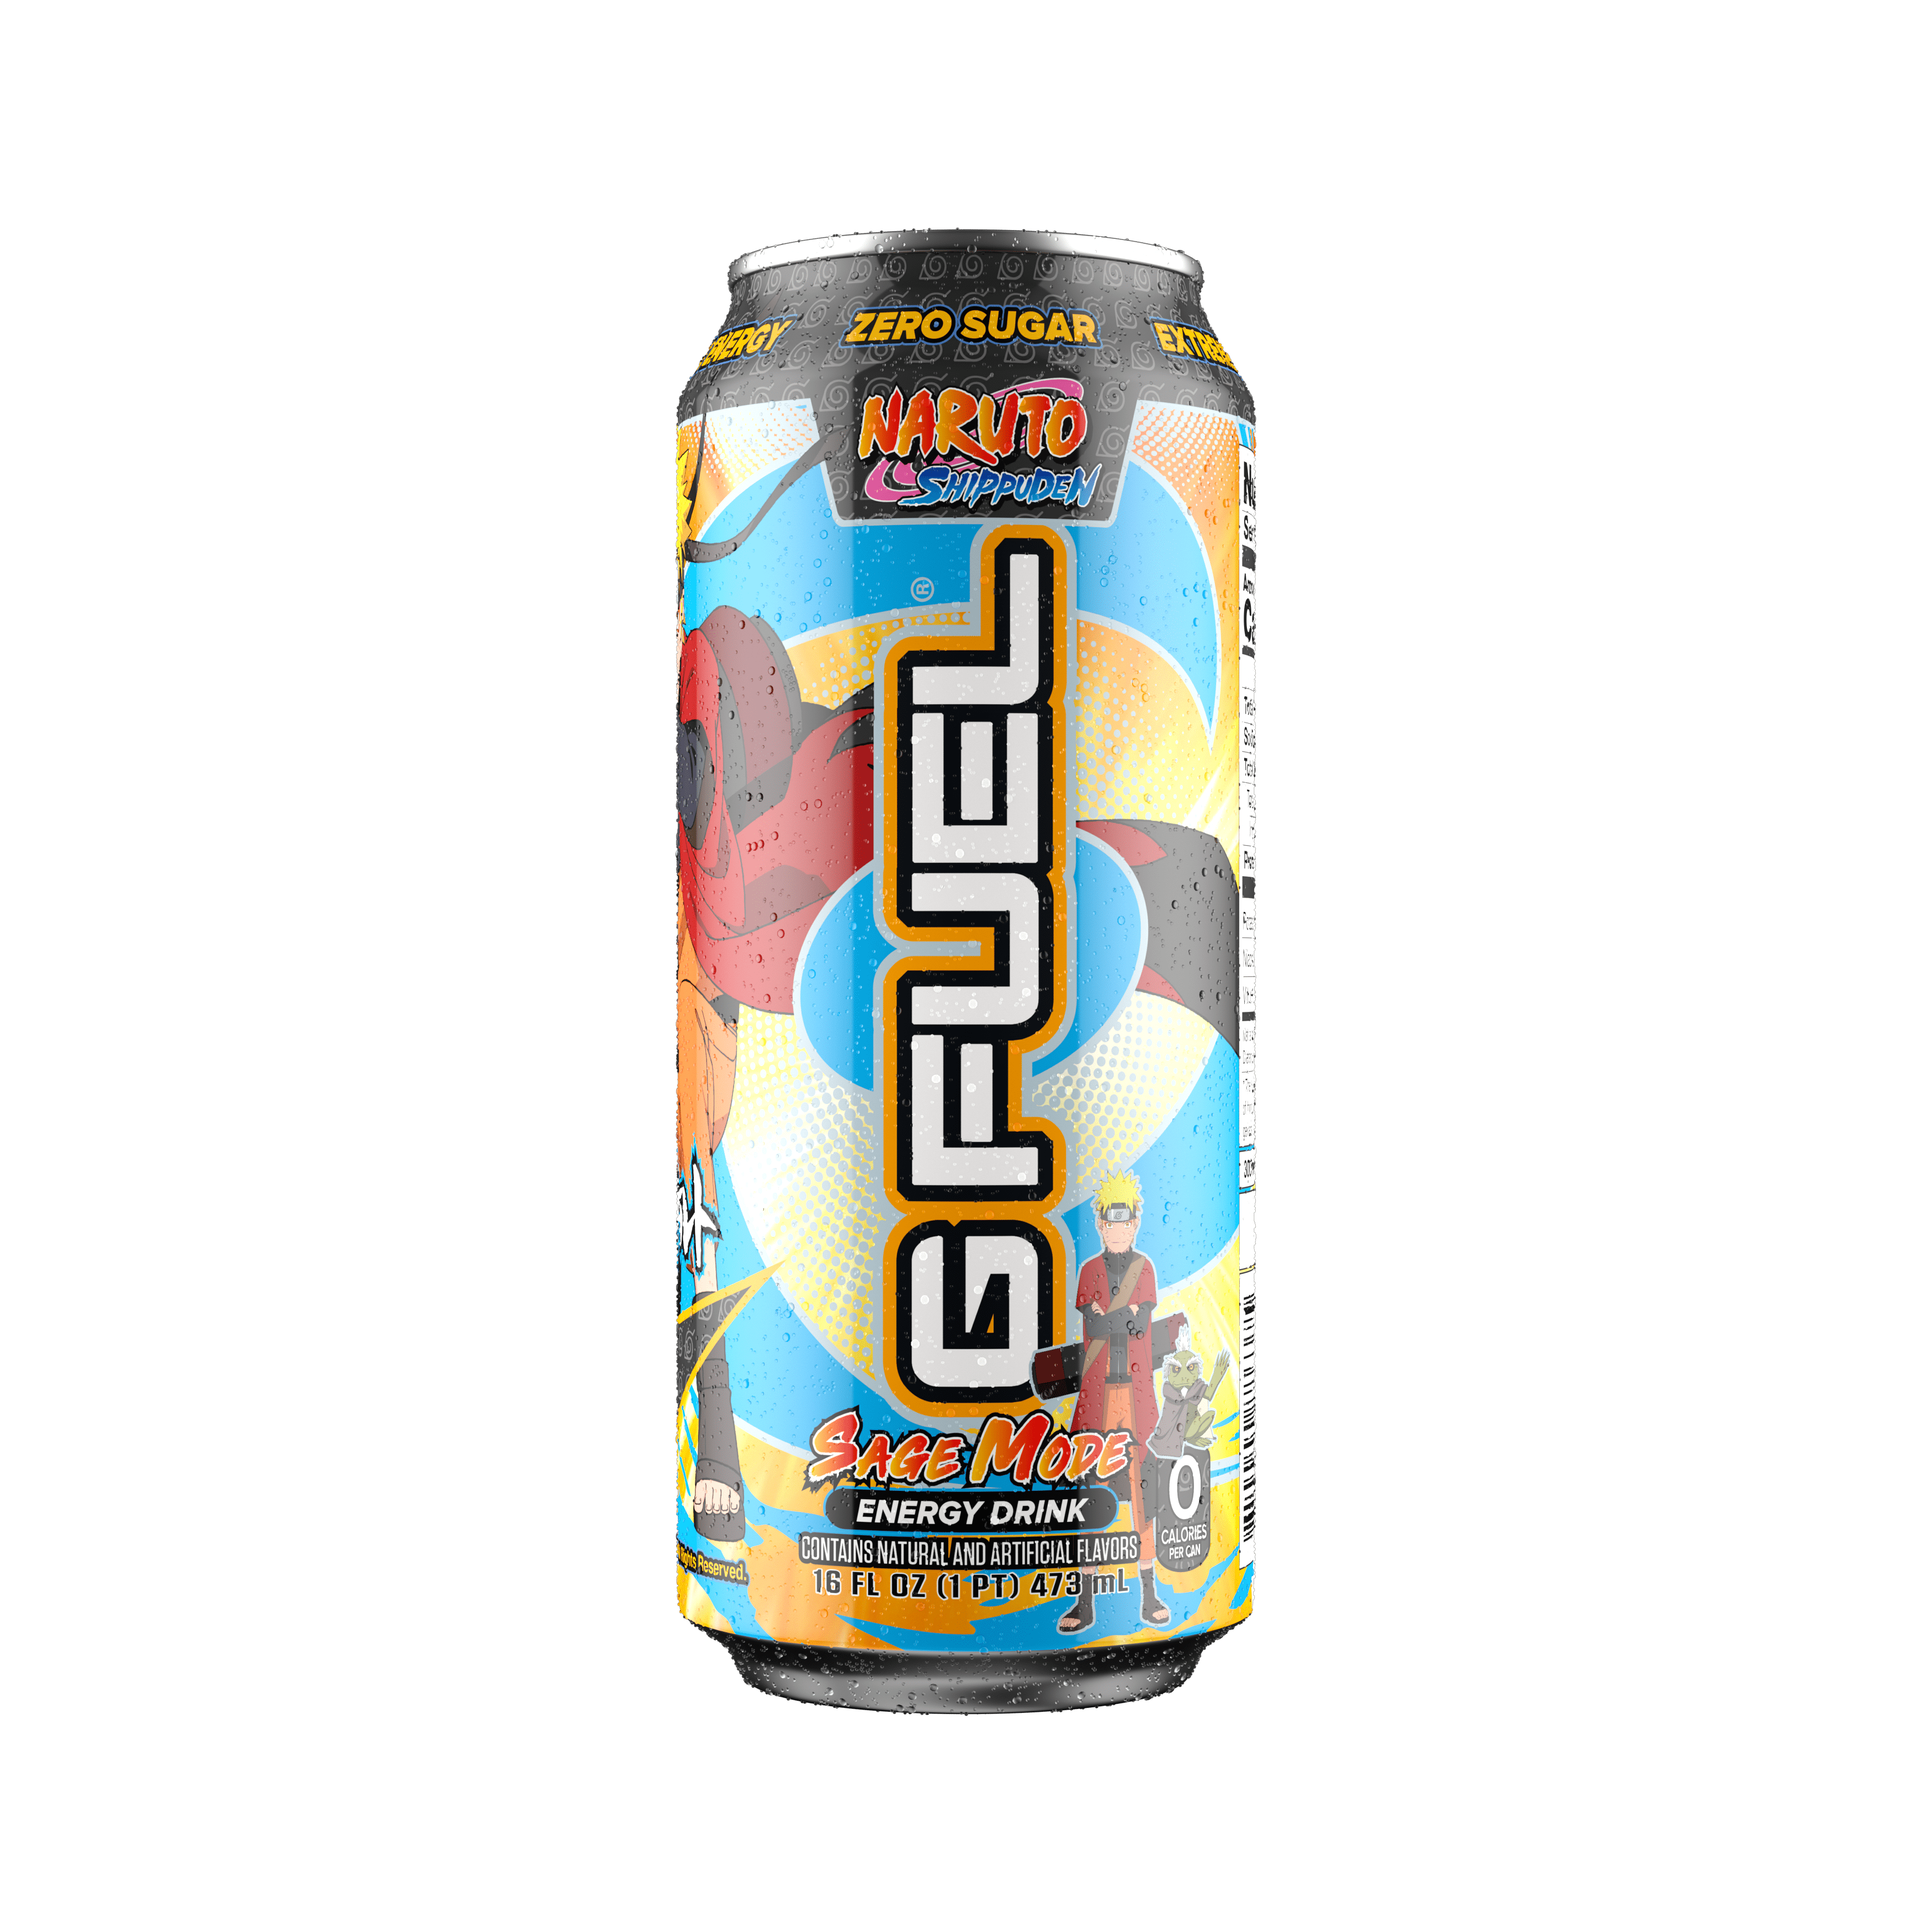 G Fuel and Gundam's Ramune Melon flavor named MS-M31-0N